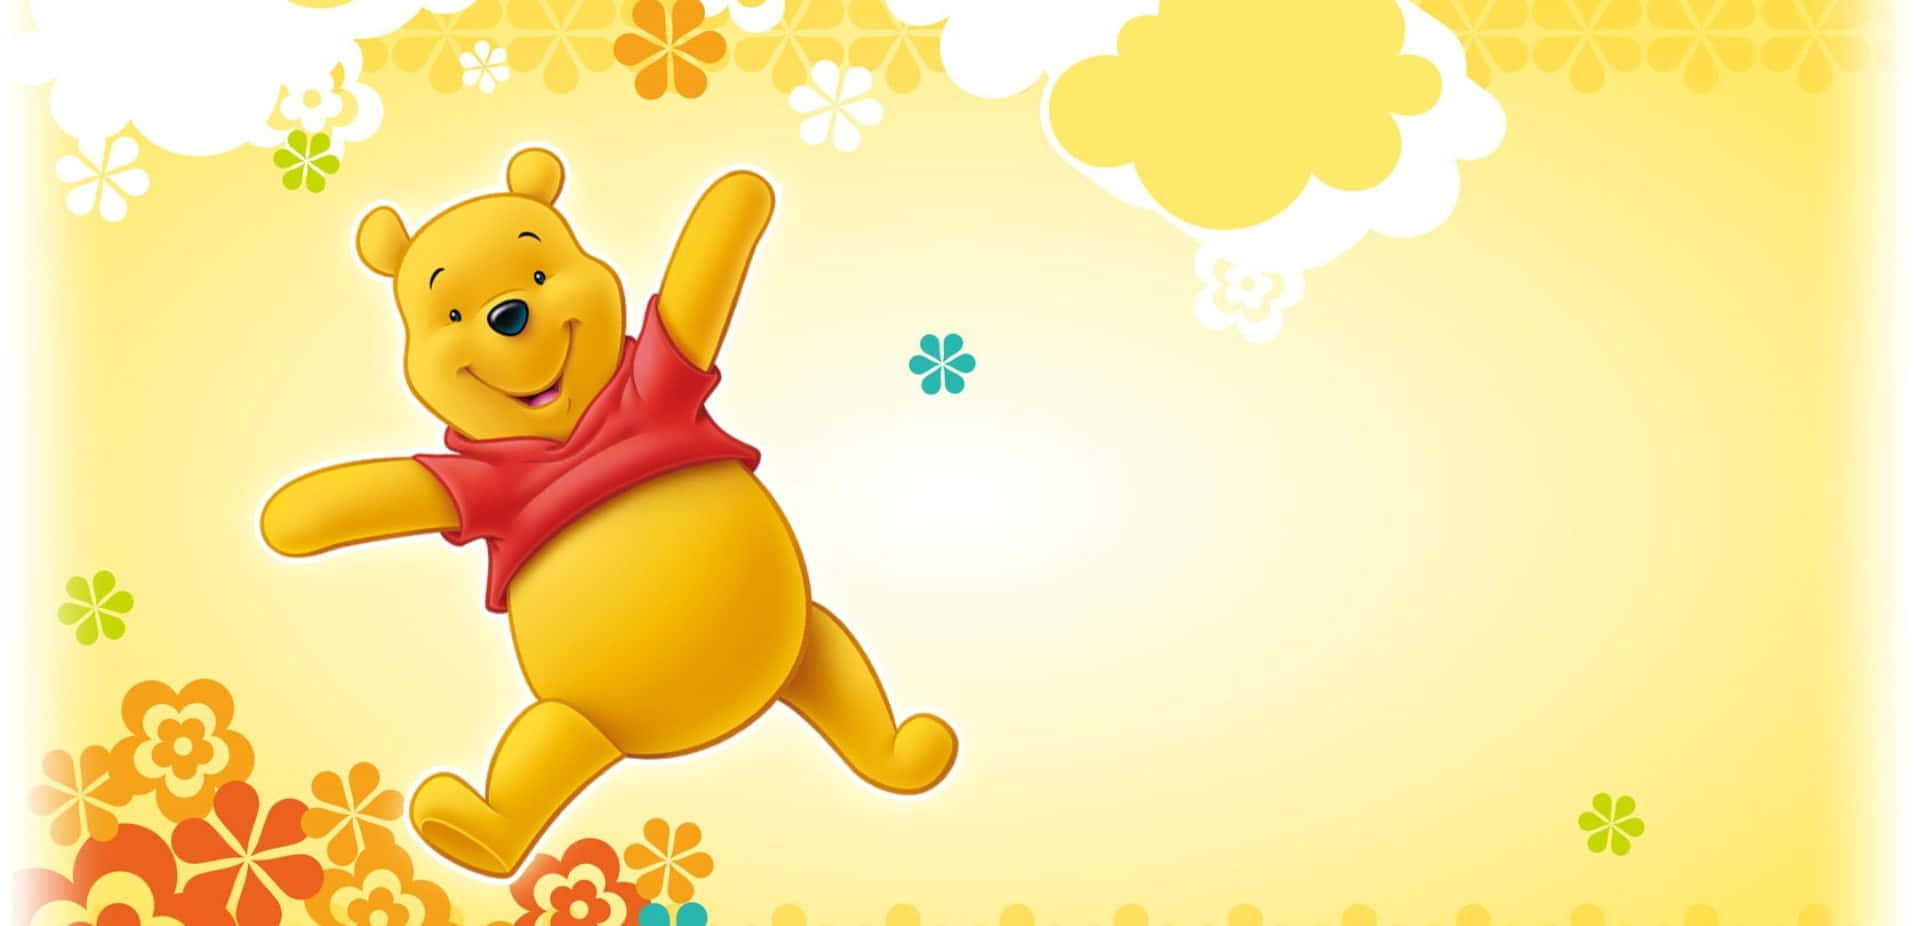 Get tech savvy with this adorable Winnie The Pooh laptop! Wallpaper